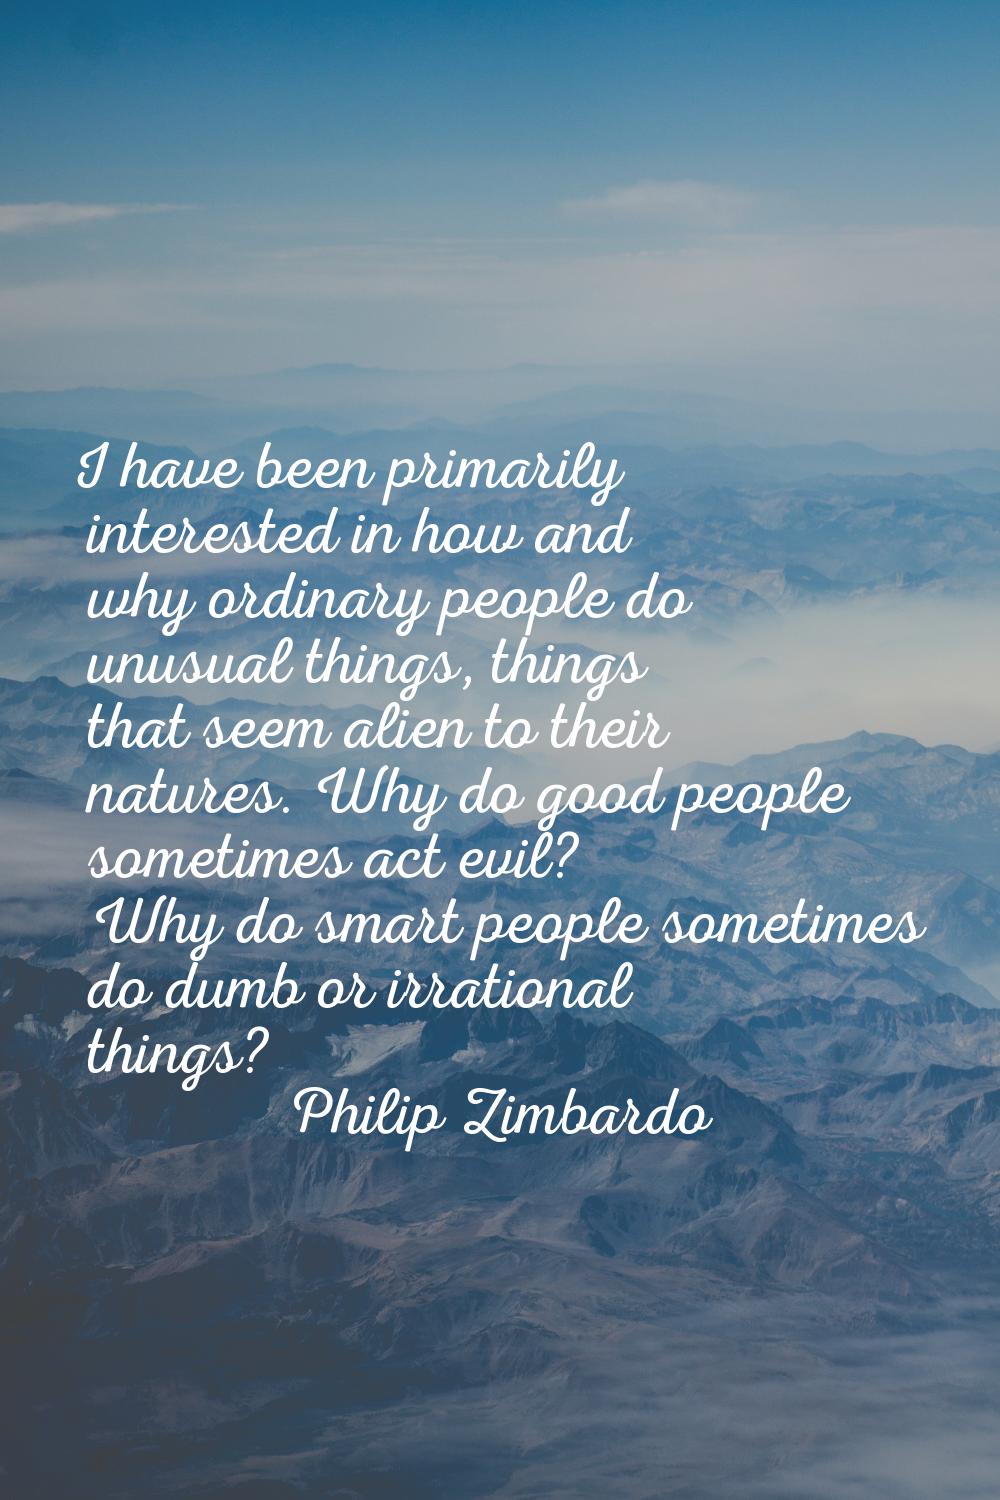 I have been primarily interested in how and why ordinary people do unusual things, things that seem